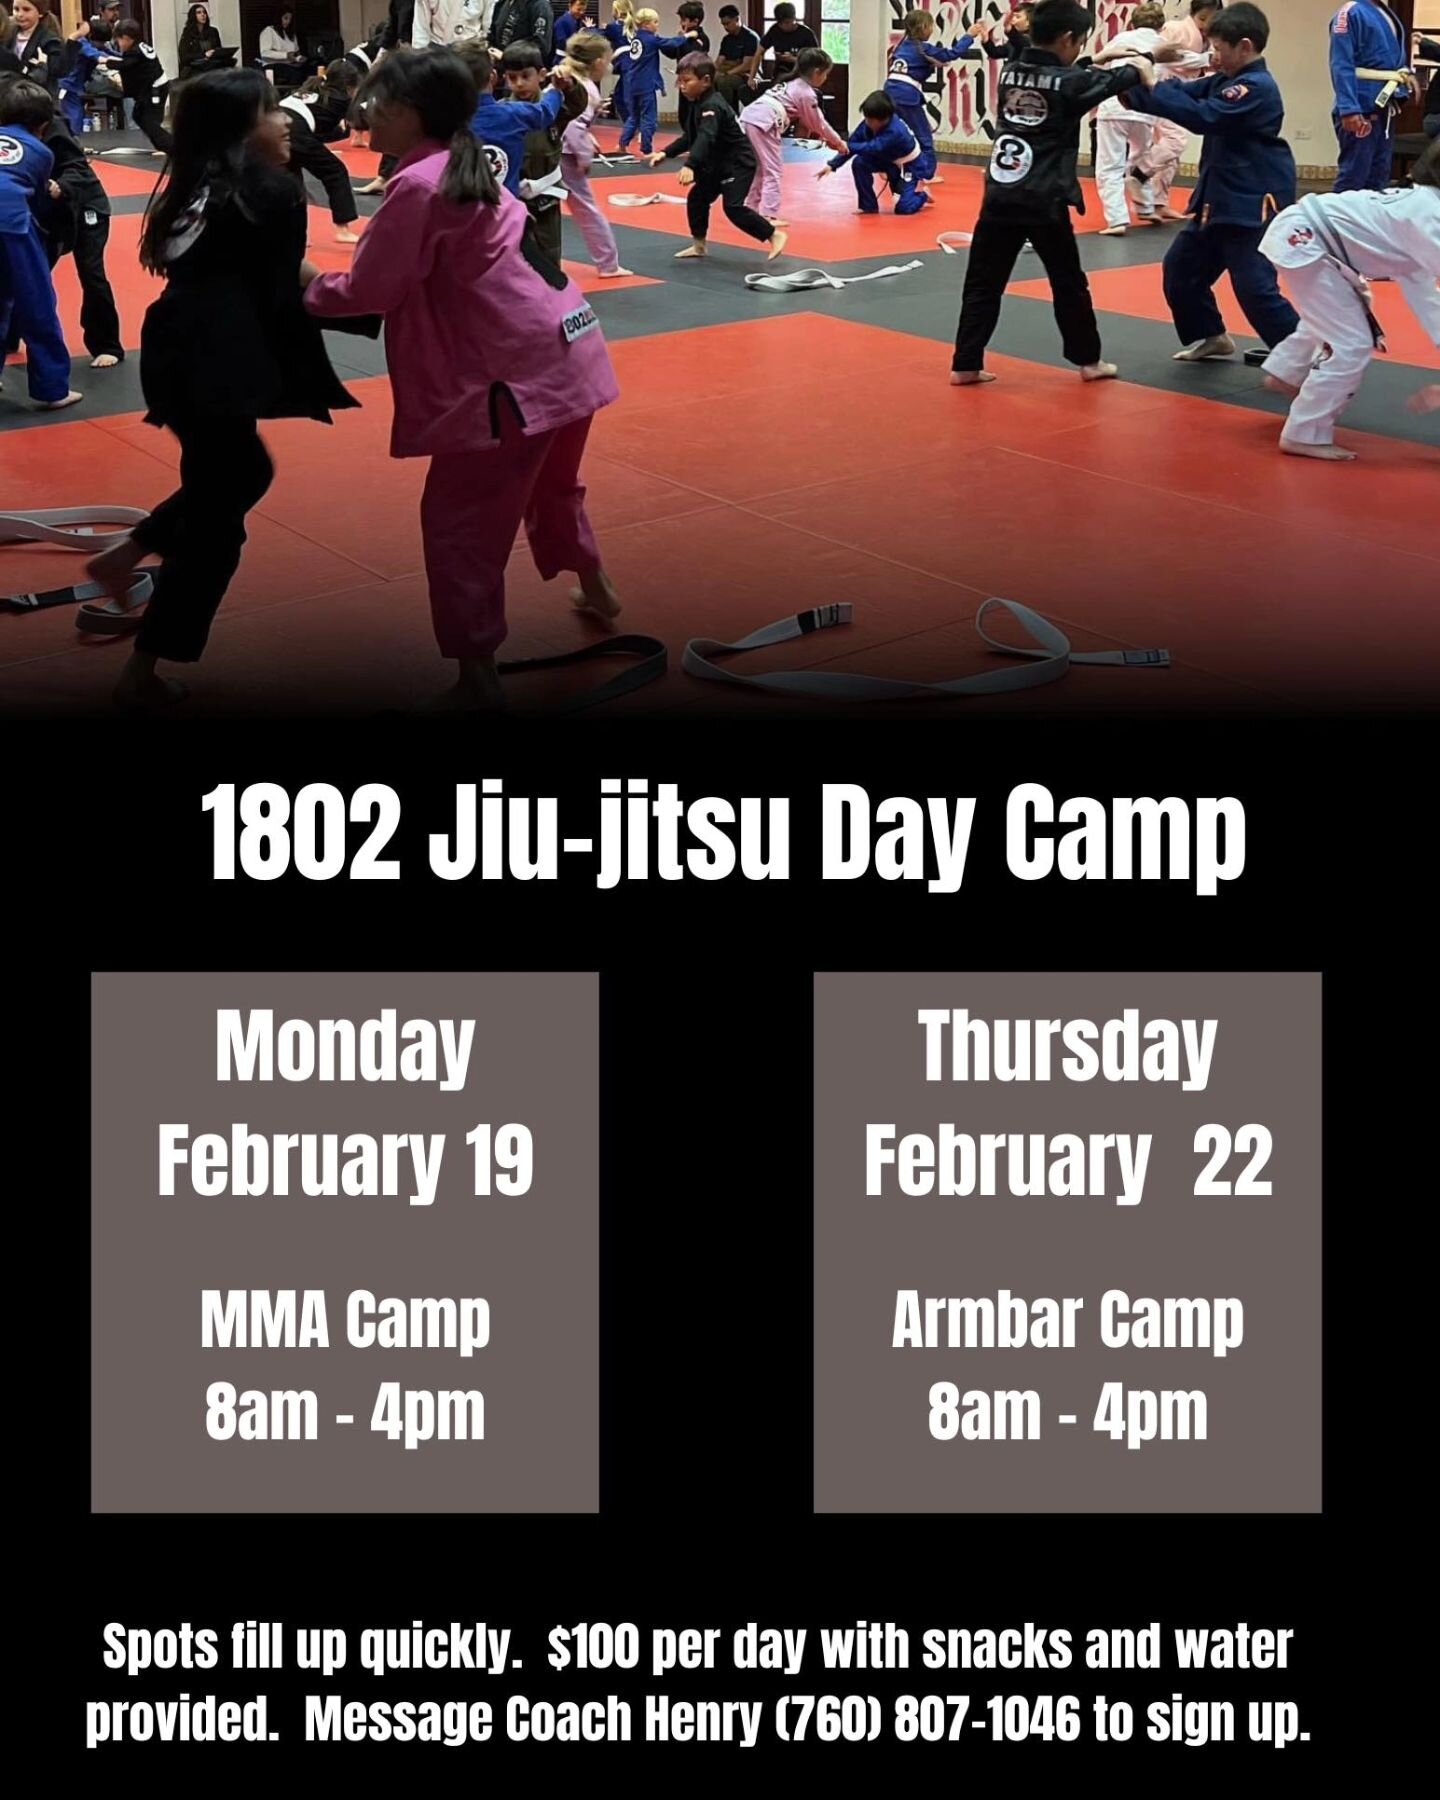 We will be having a few jiu jitsu day camps on the 19th and 22nd of February. Monday will be focused on kids Mma training and it will be led by Professor @miguel97___  Thursday will be focused on armbars from every position and it will be led by Prof